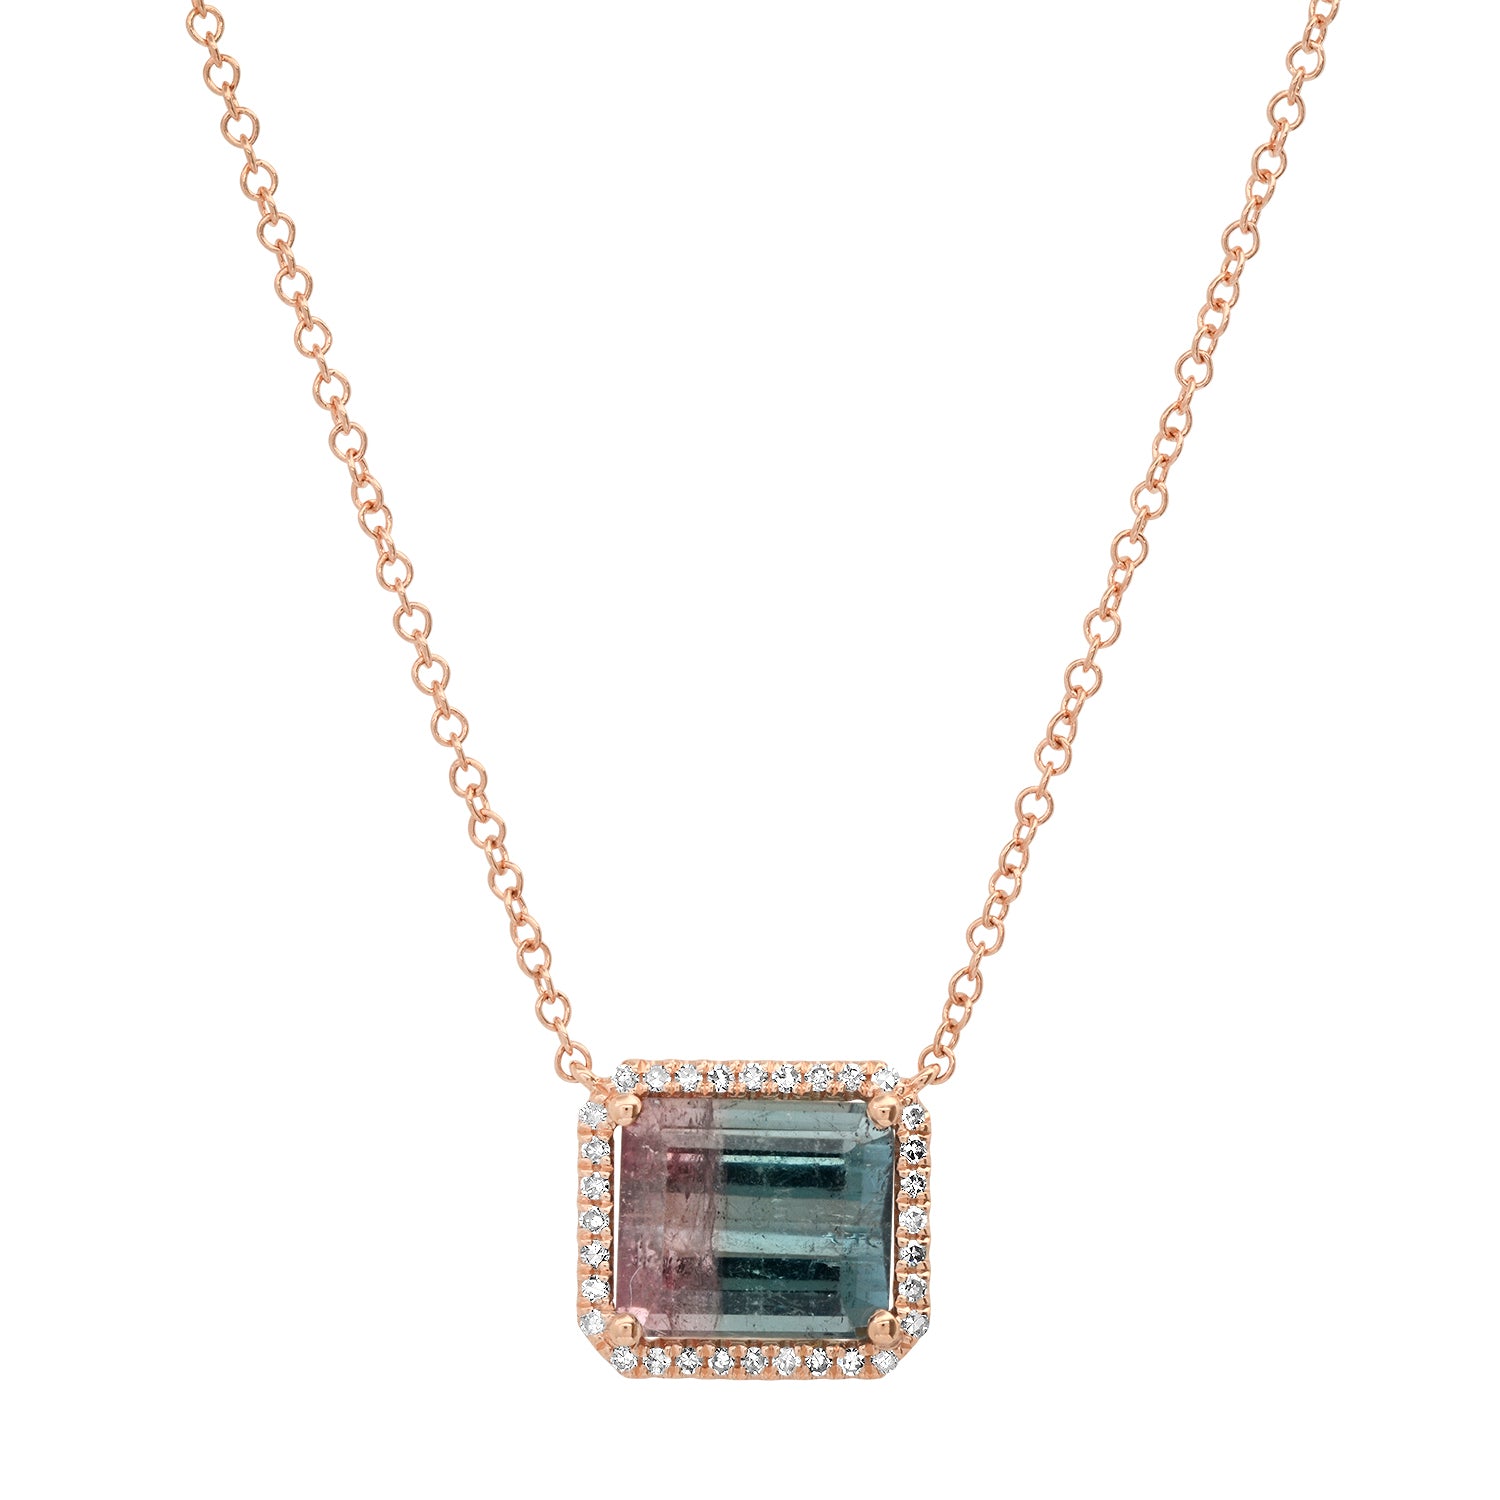 One of a Kind  Bicolor Tourmaline Necklace with Diamond Frame